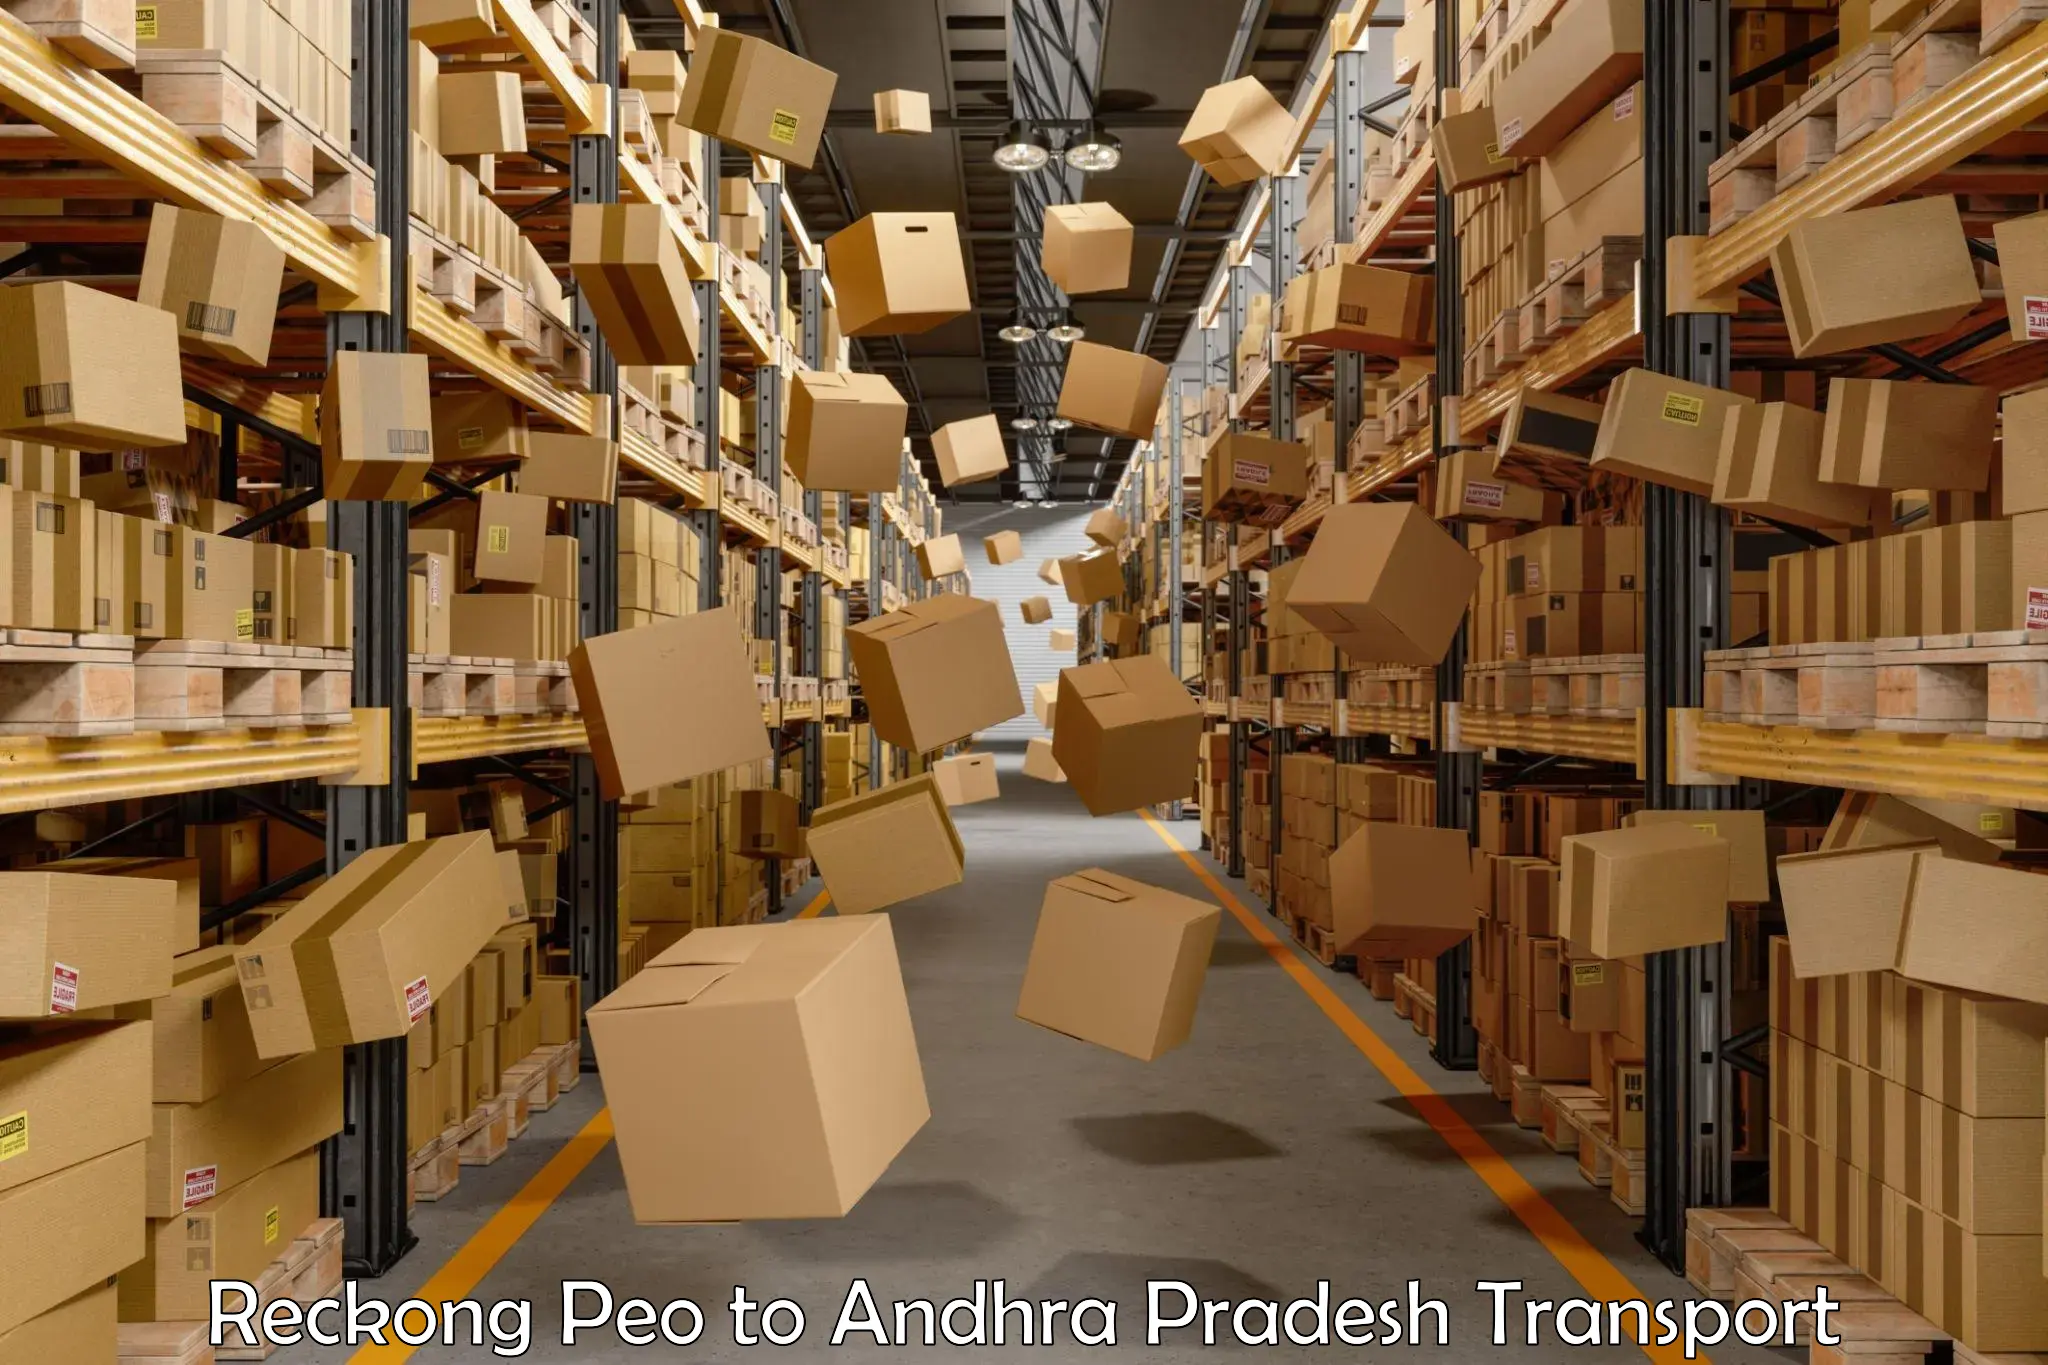 Daily parcel service transport Reckong Peo to Tenali